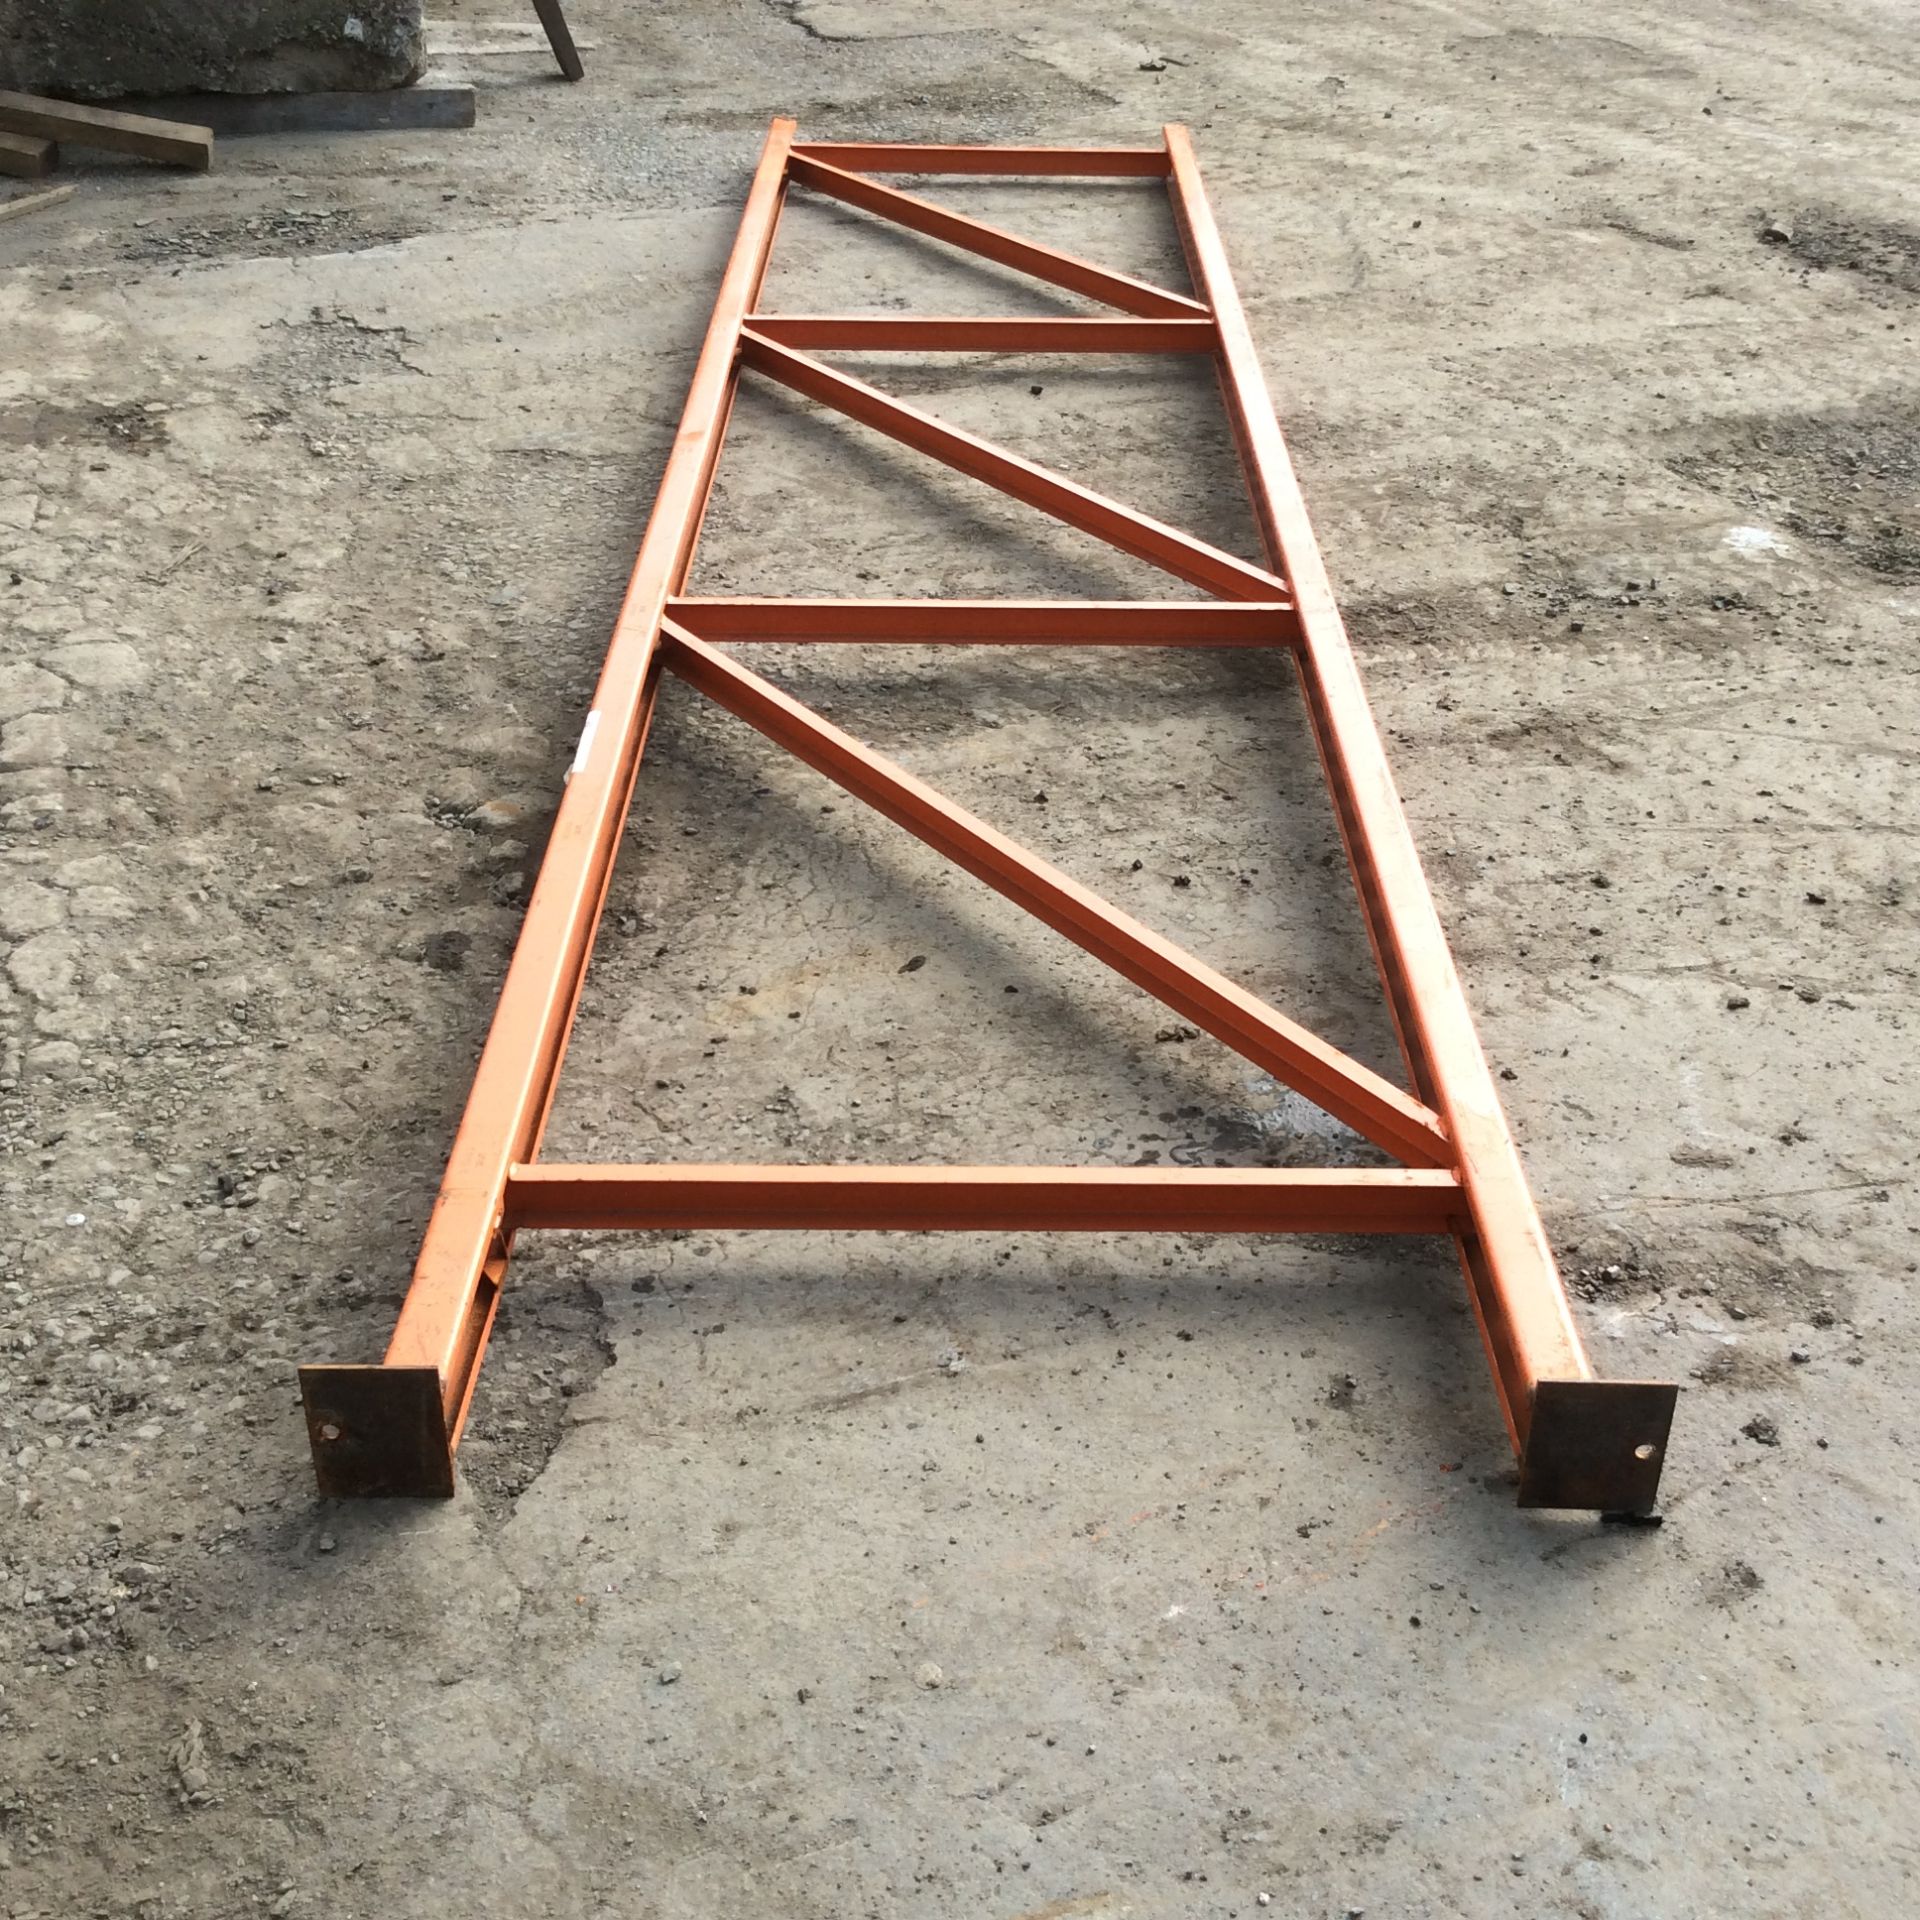 Pallet Racking Included is x12 Uprights - 440cm Height And x86 Beams - 266cm Inside Width. - Image 6 of 7